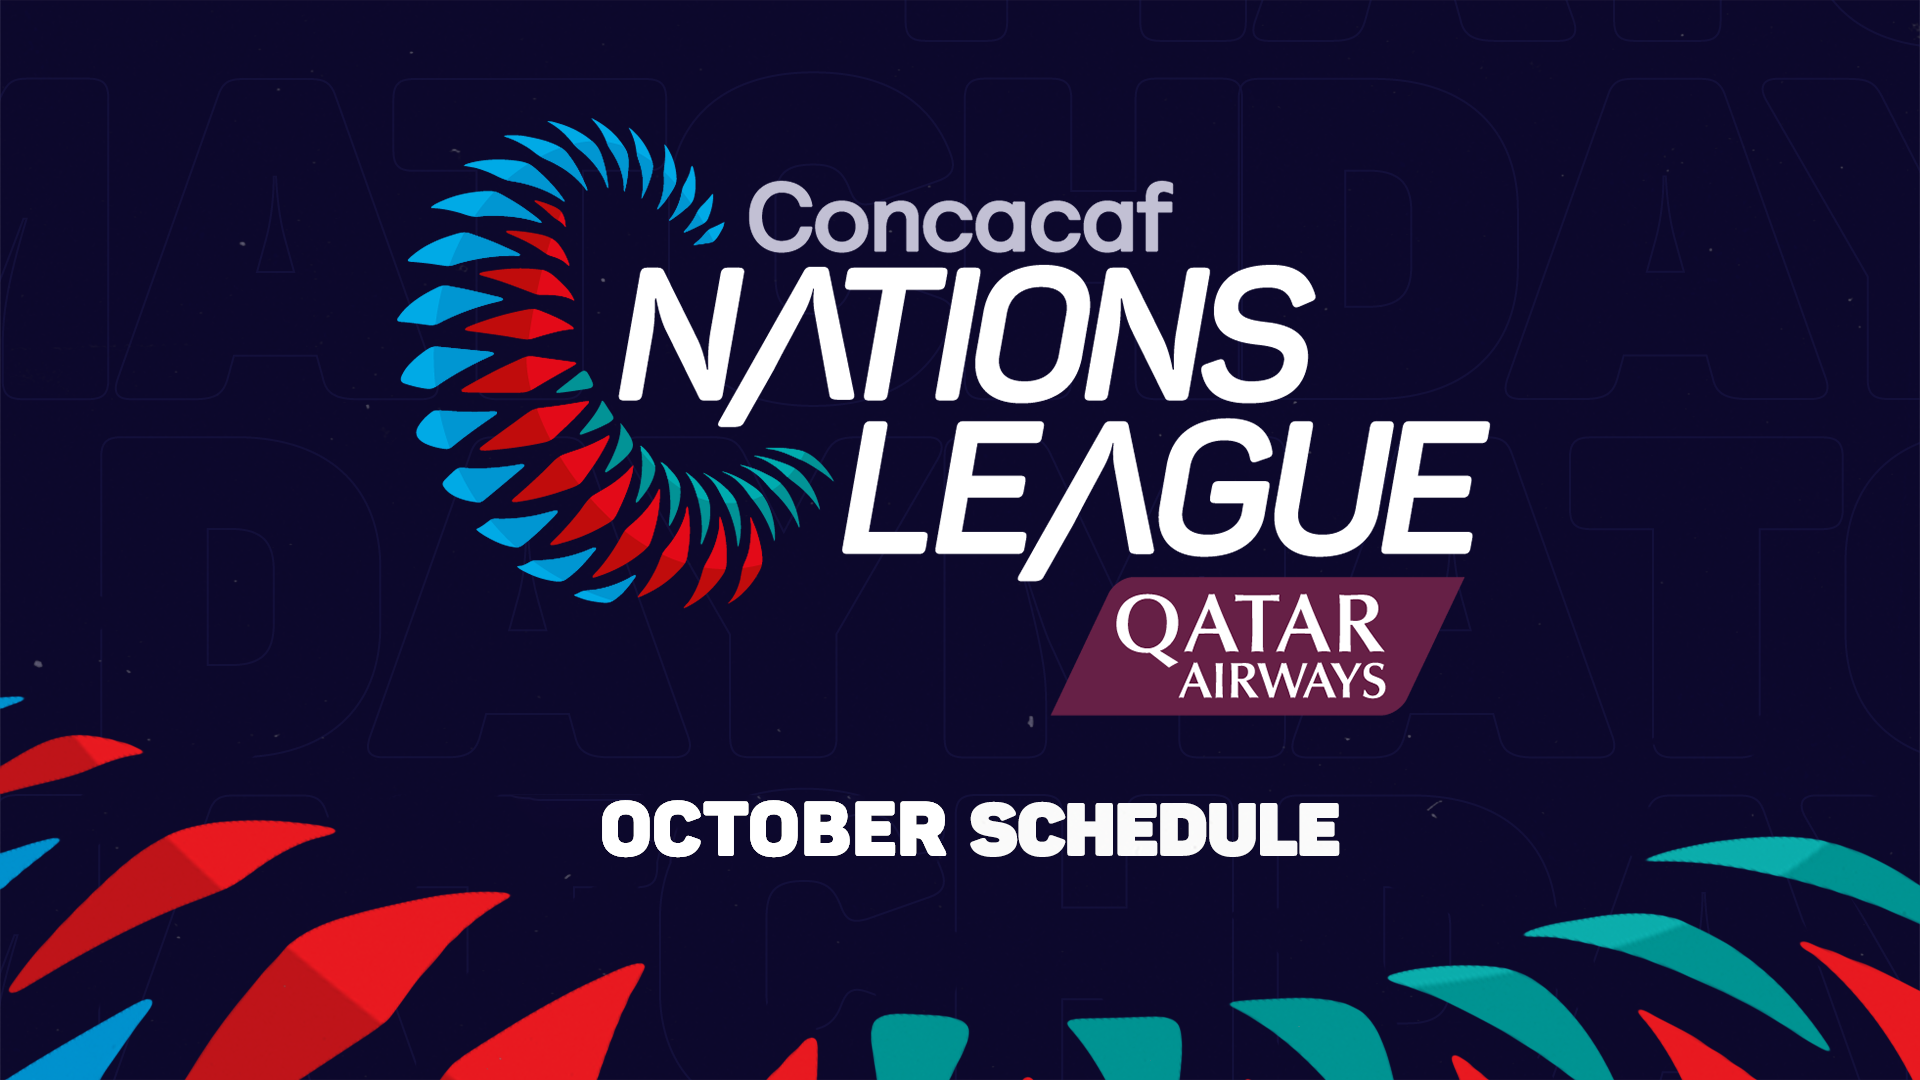 USA vs. Cuba, CONCACAF Nations League group stage: What to watch